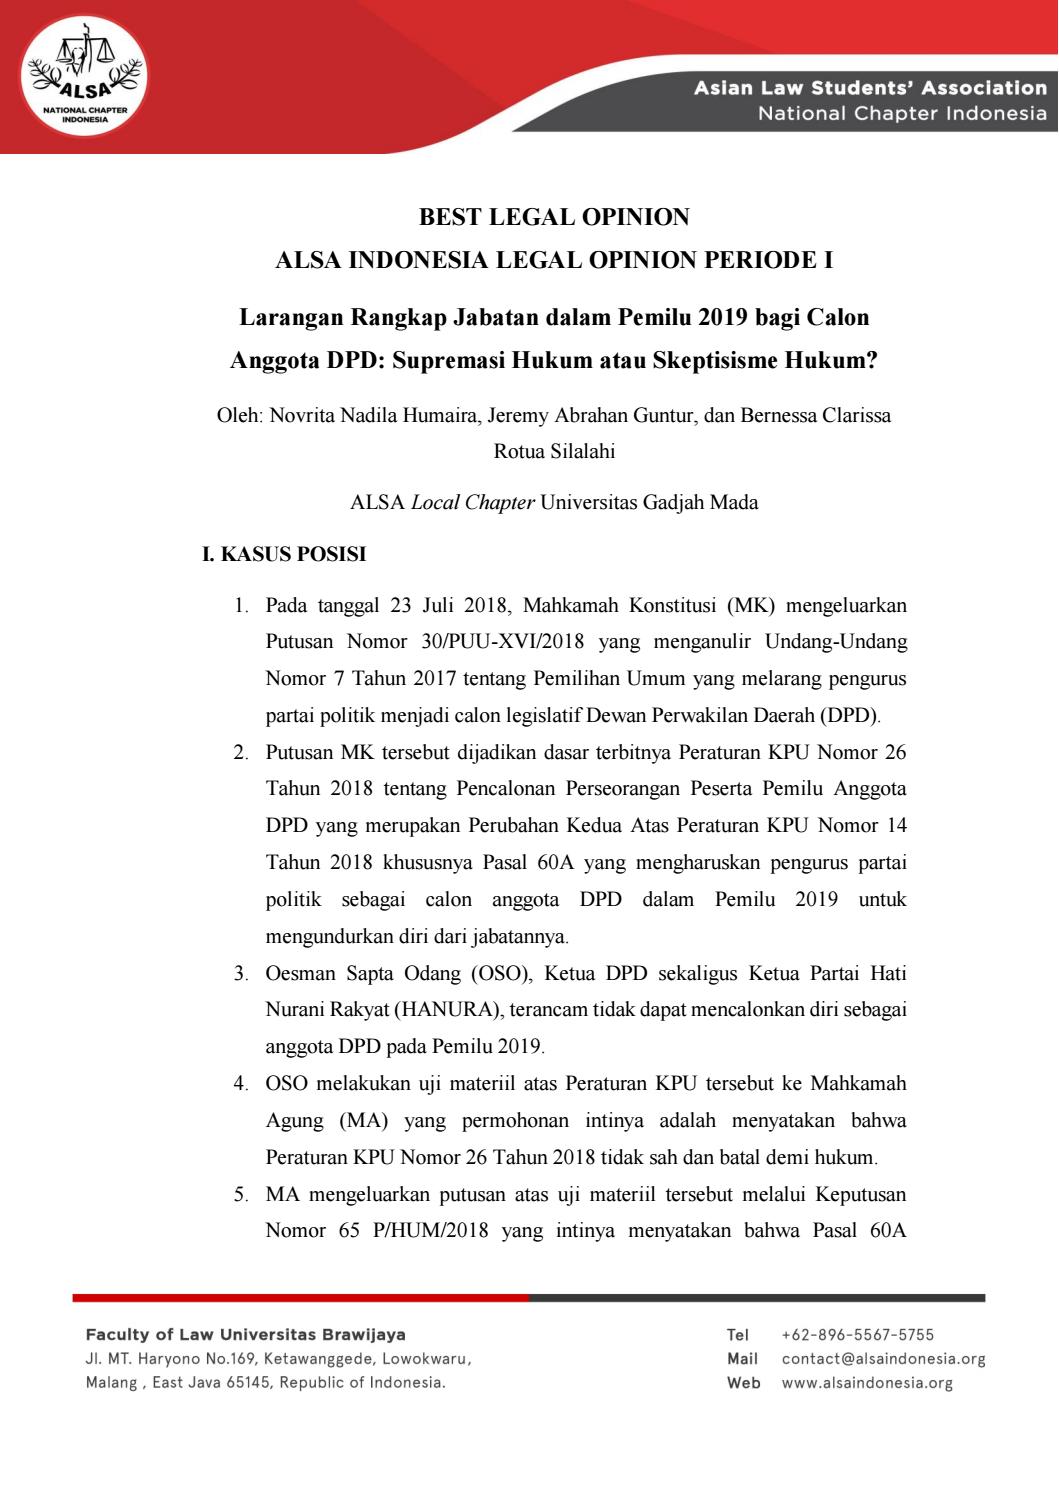 Detail Contoh Legal Opinion Nomer 33